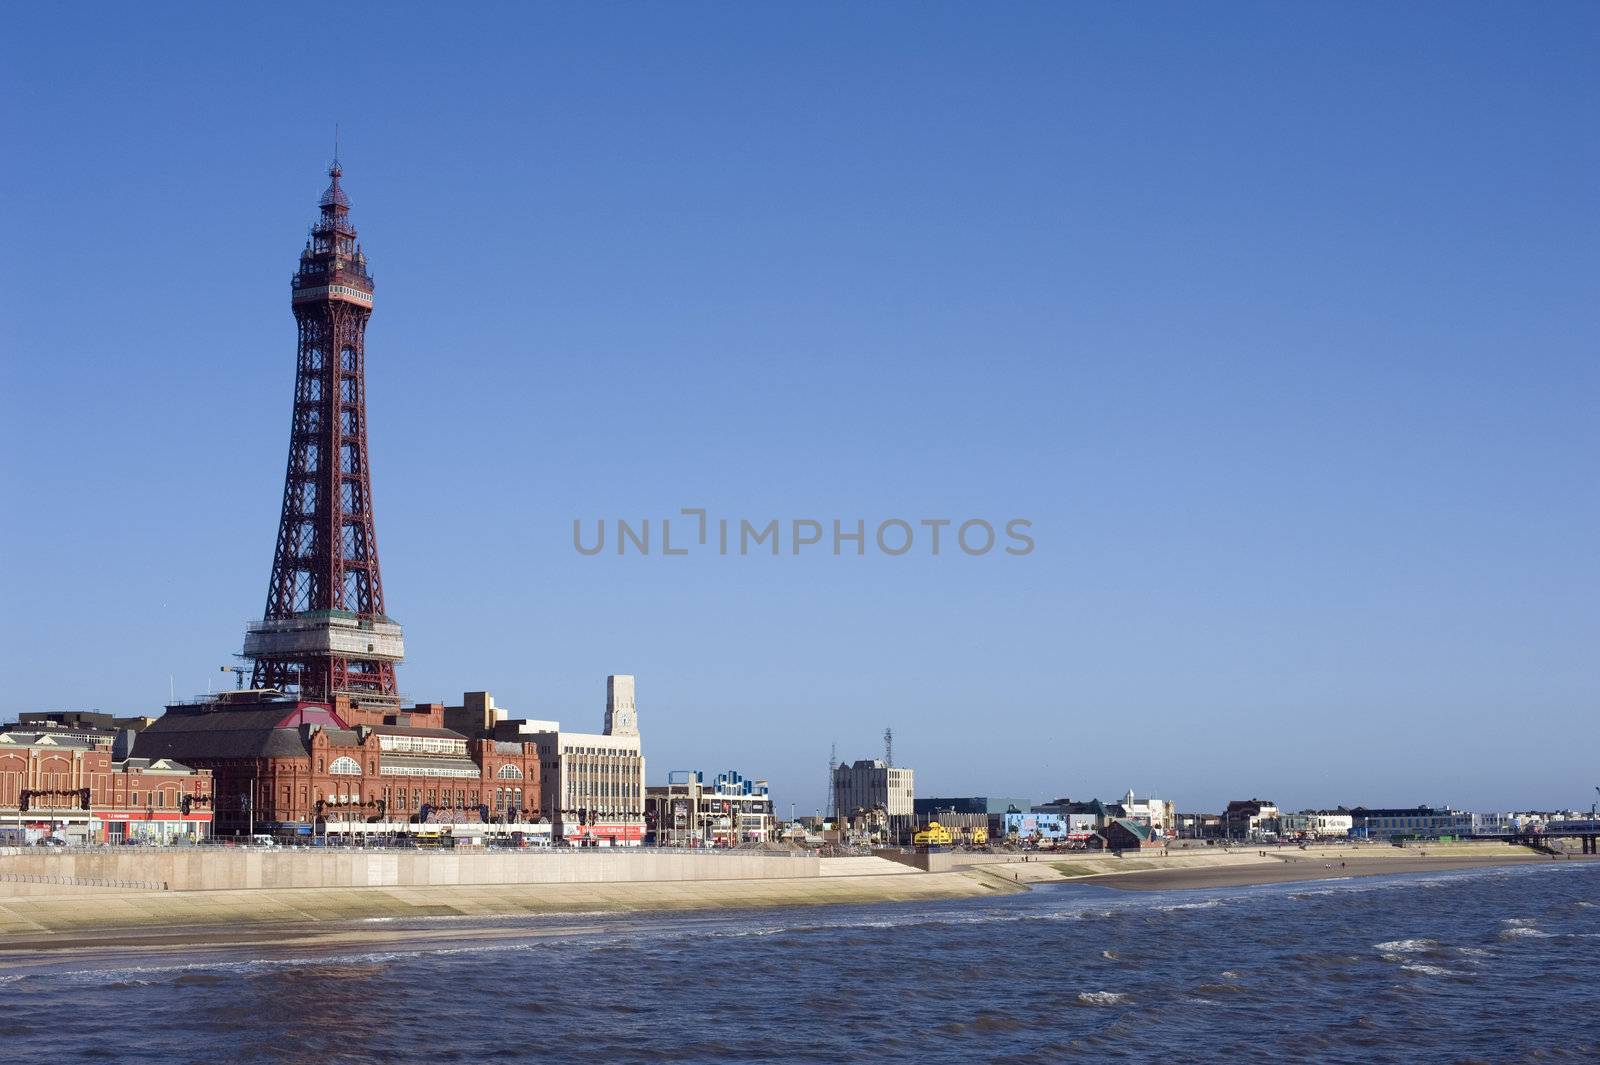 Blackpool waterfront and beach with Blackpool Tower, a historical Victorian lattice structure, overlooking the ocean